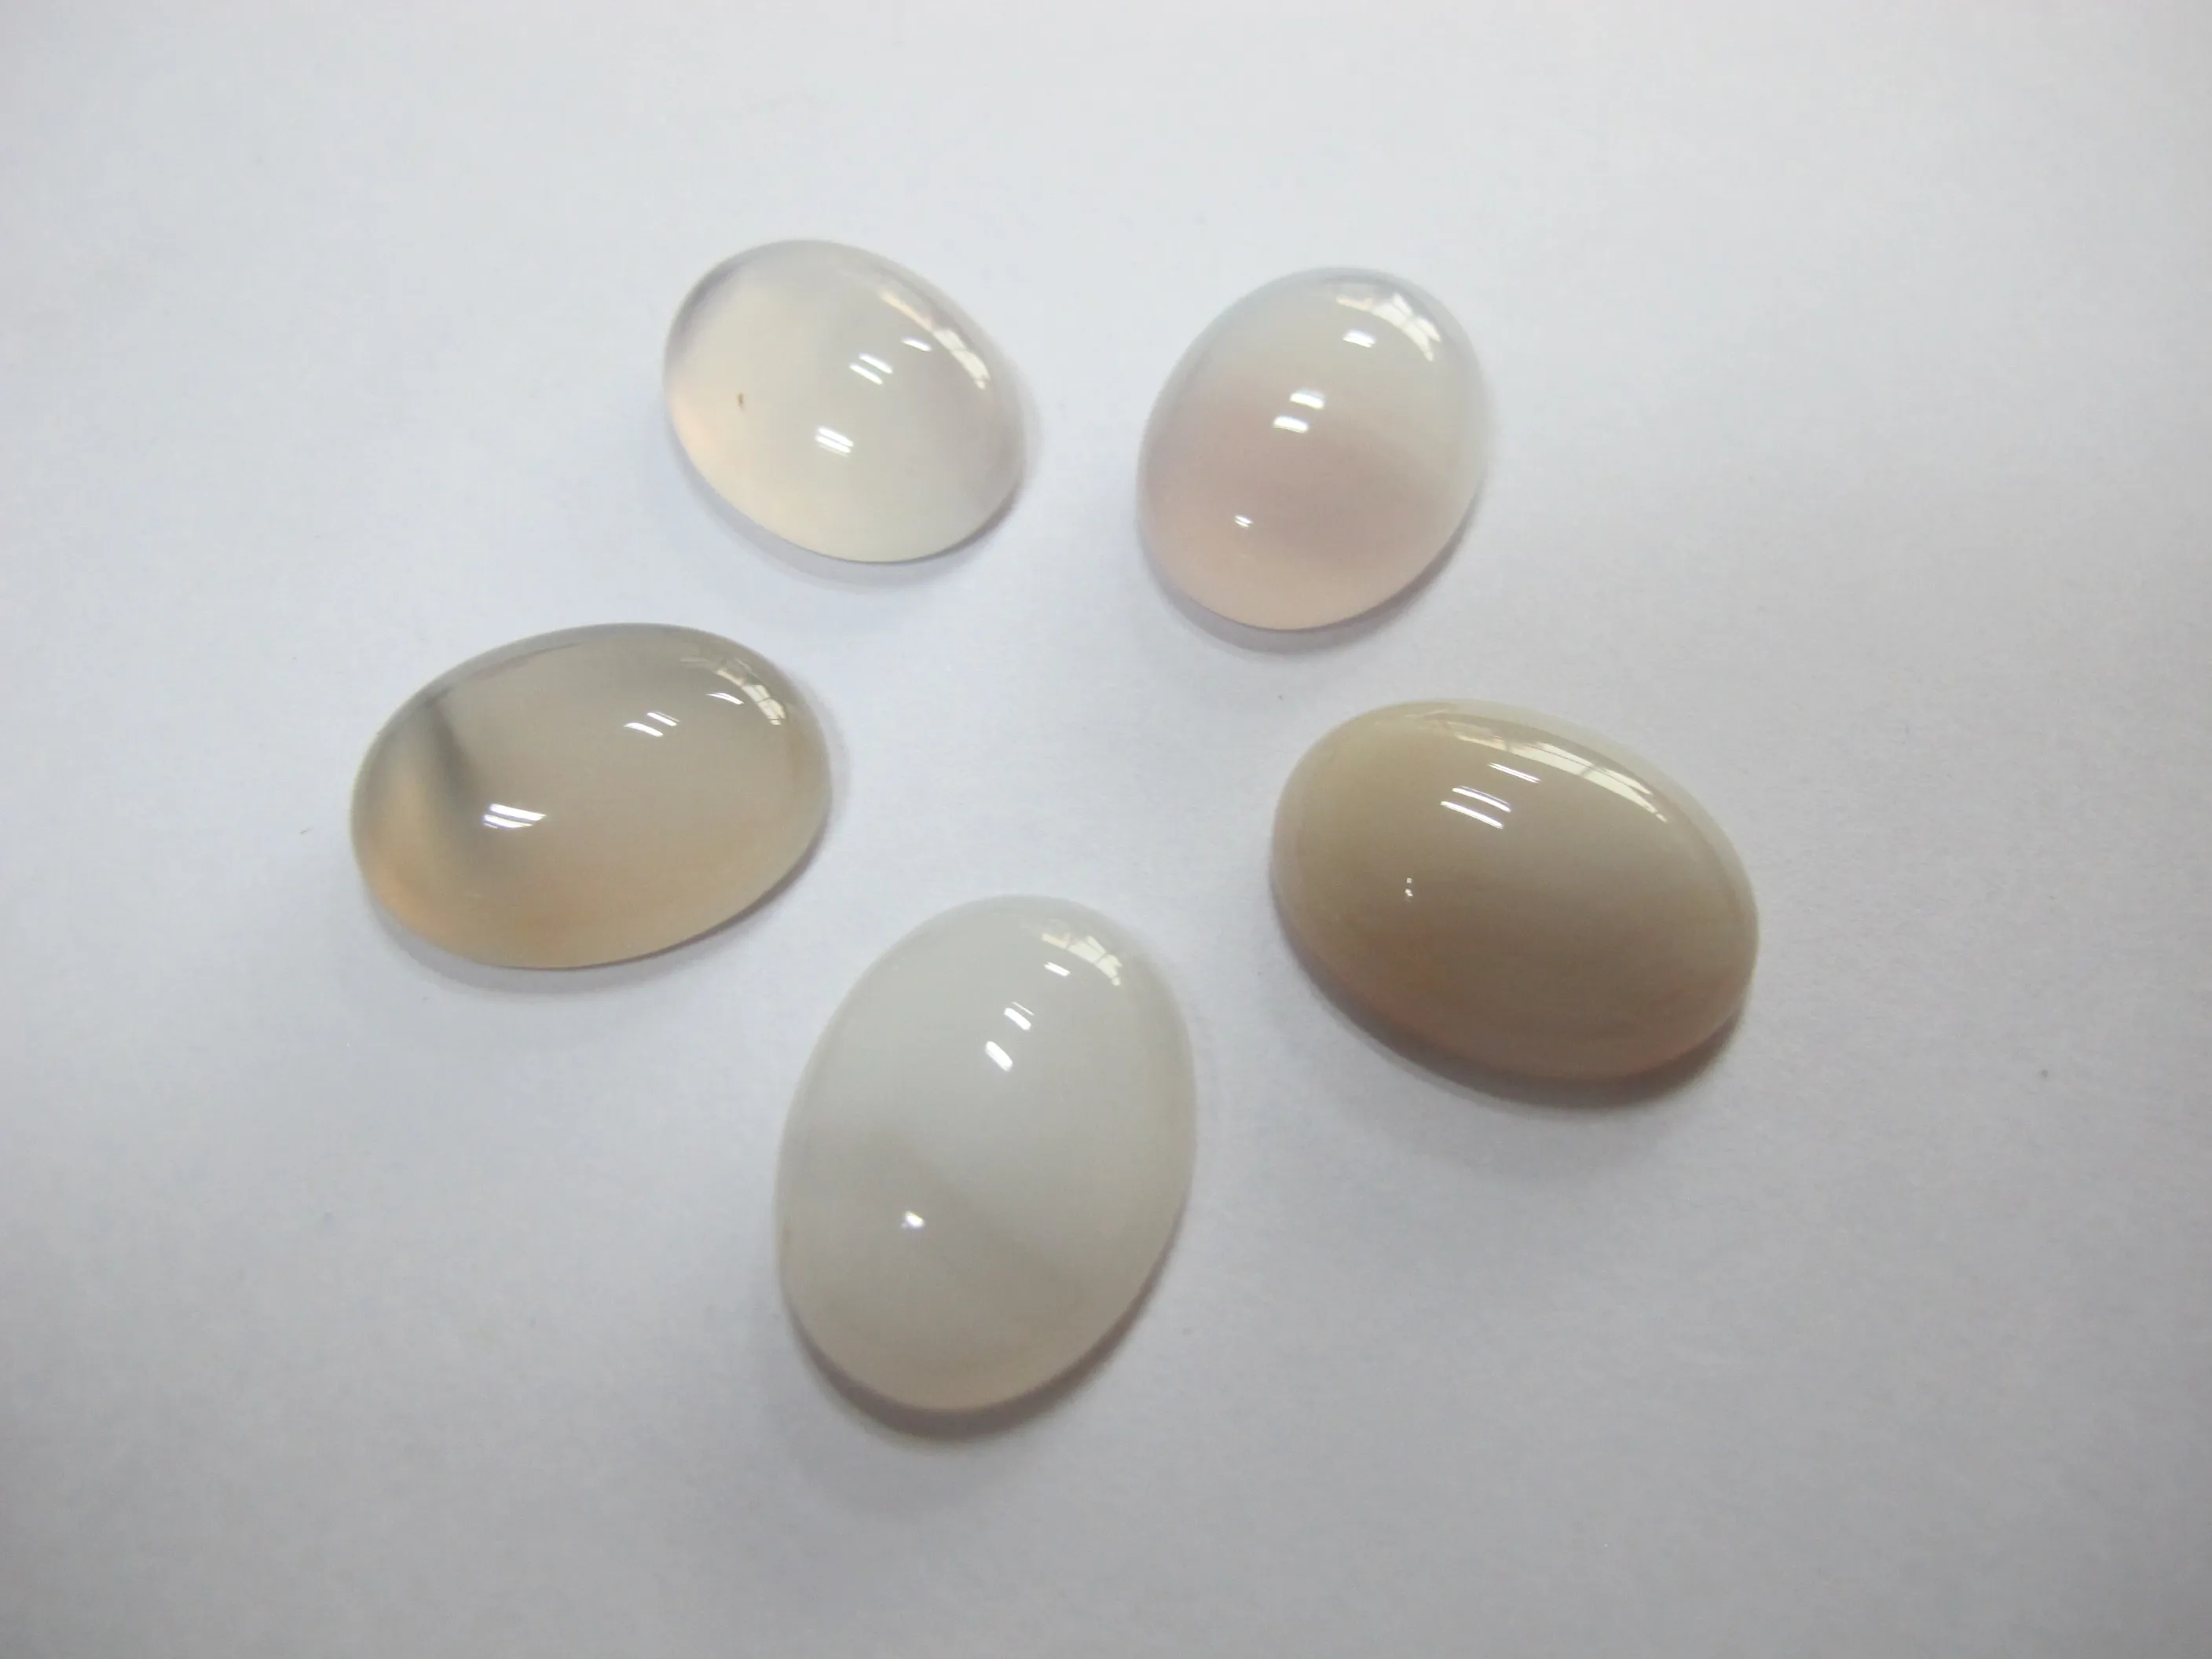 

Wholesale 3pcs/lot Natural White Carnelian Agate Bead Cabochon 18x25mm Oval Gem Stone Jewelry Ring Face Cabochons